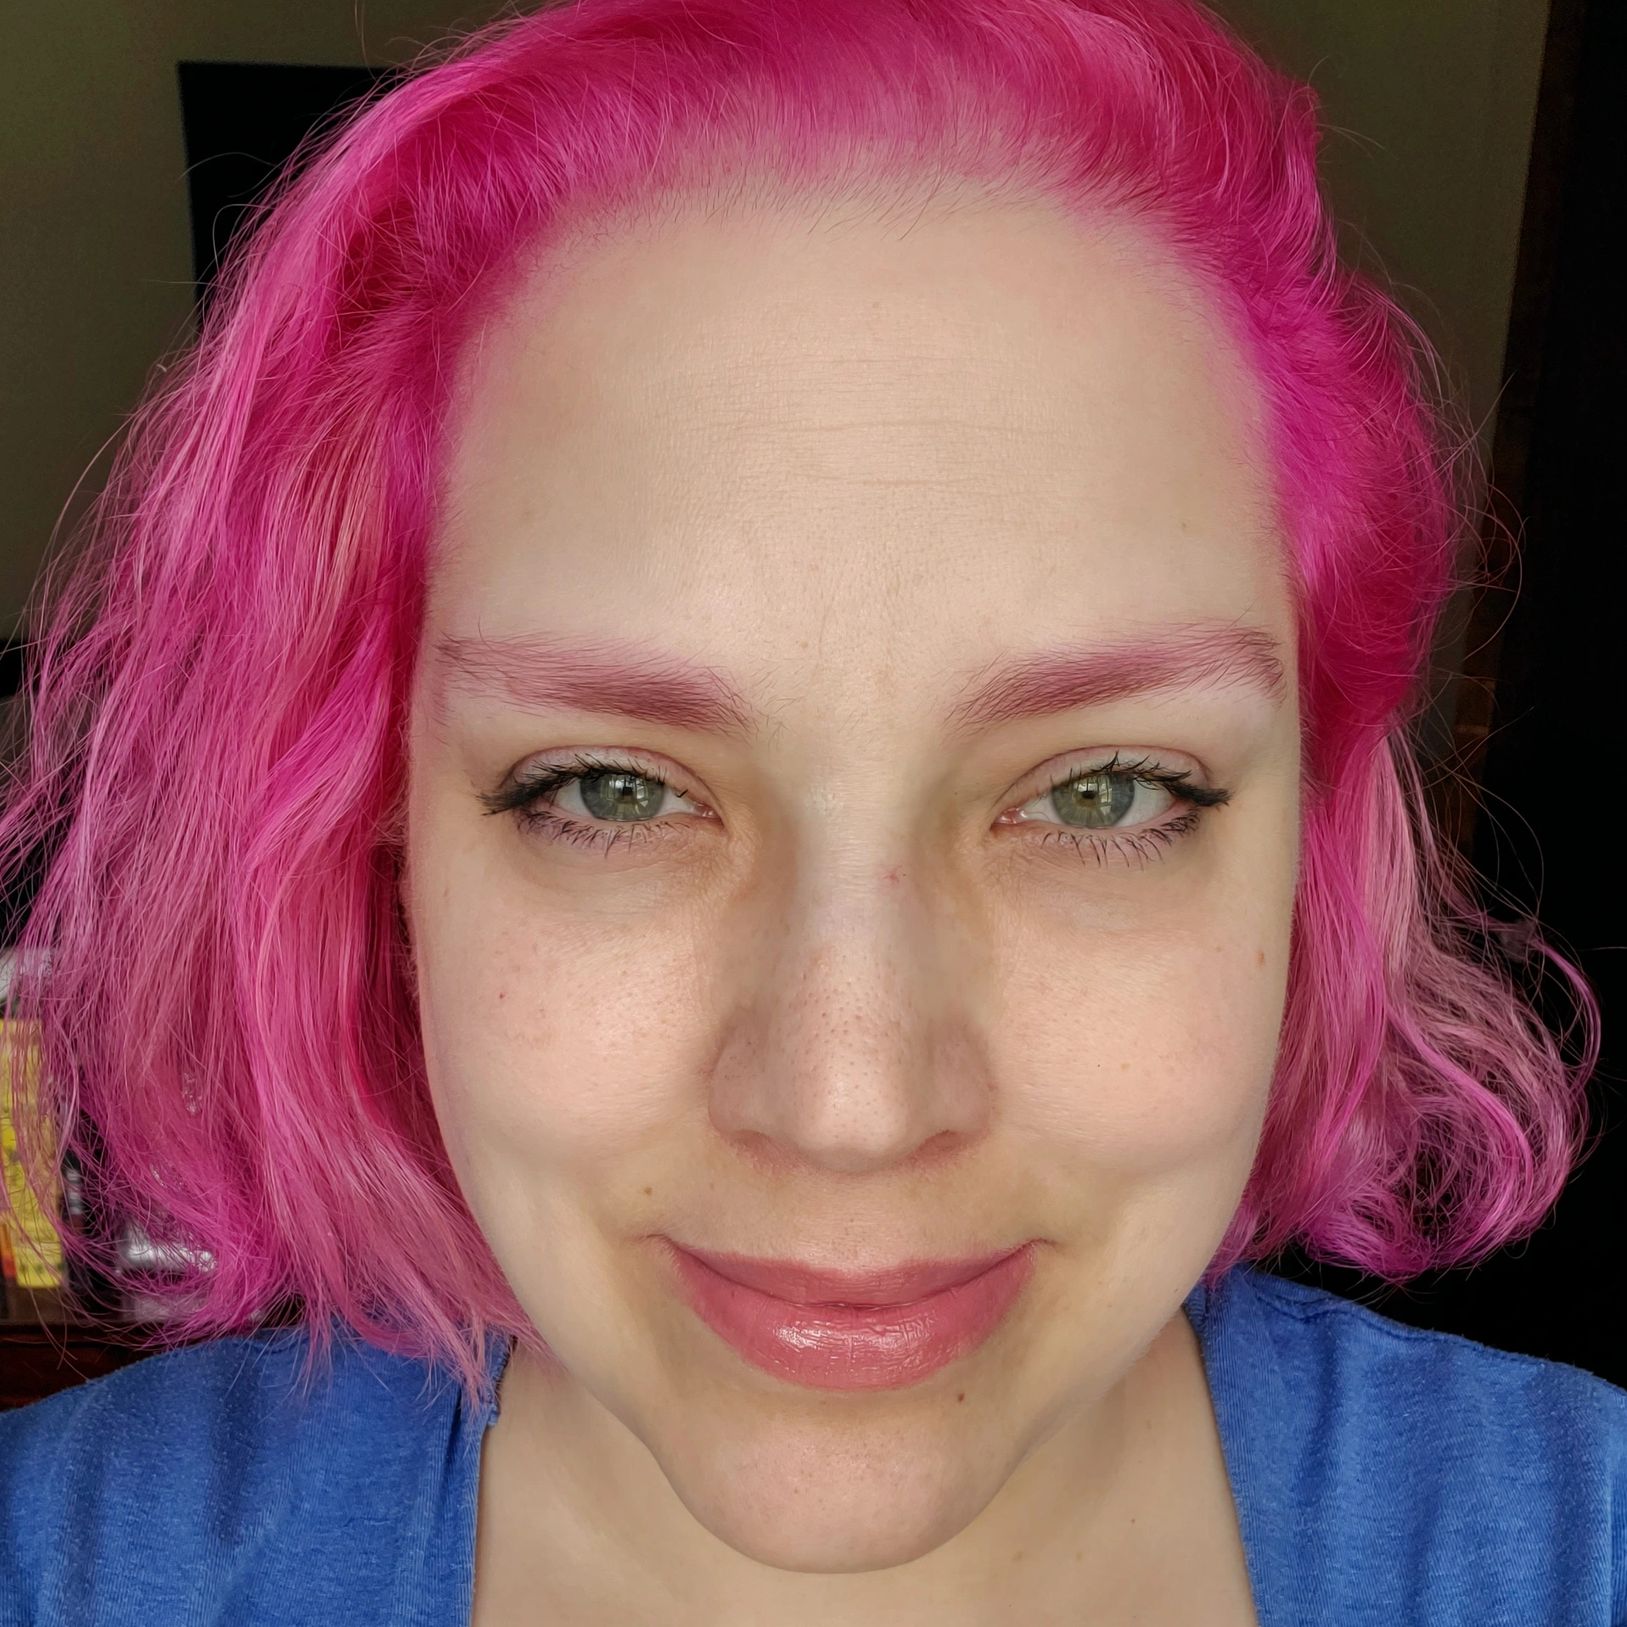 Speculative Fiction Author Jaime Johnesee with pink hair